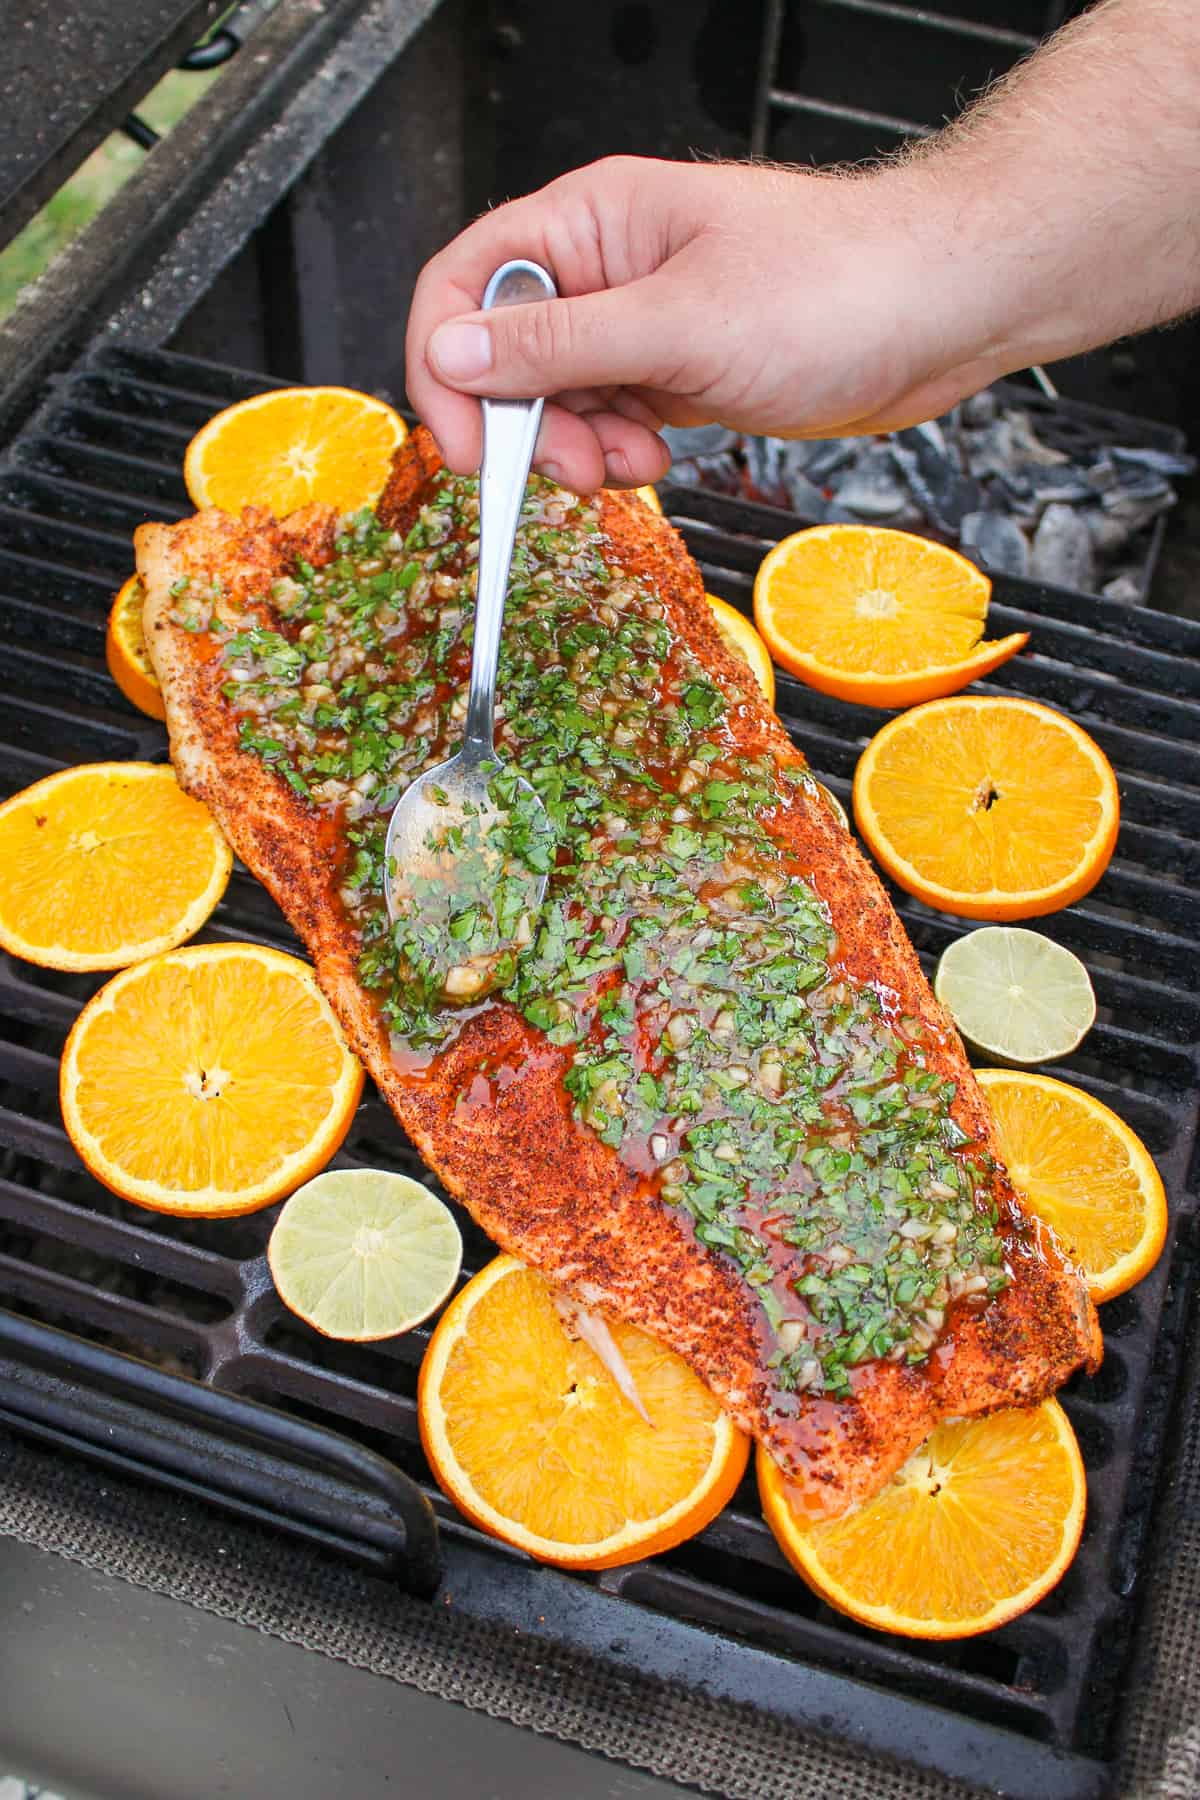 planked salmon w/chili lime sauce on the grill